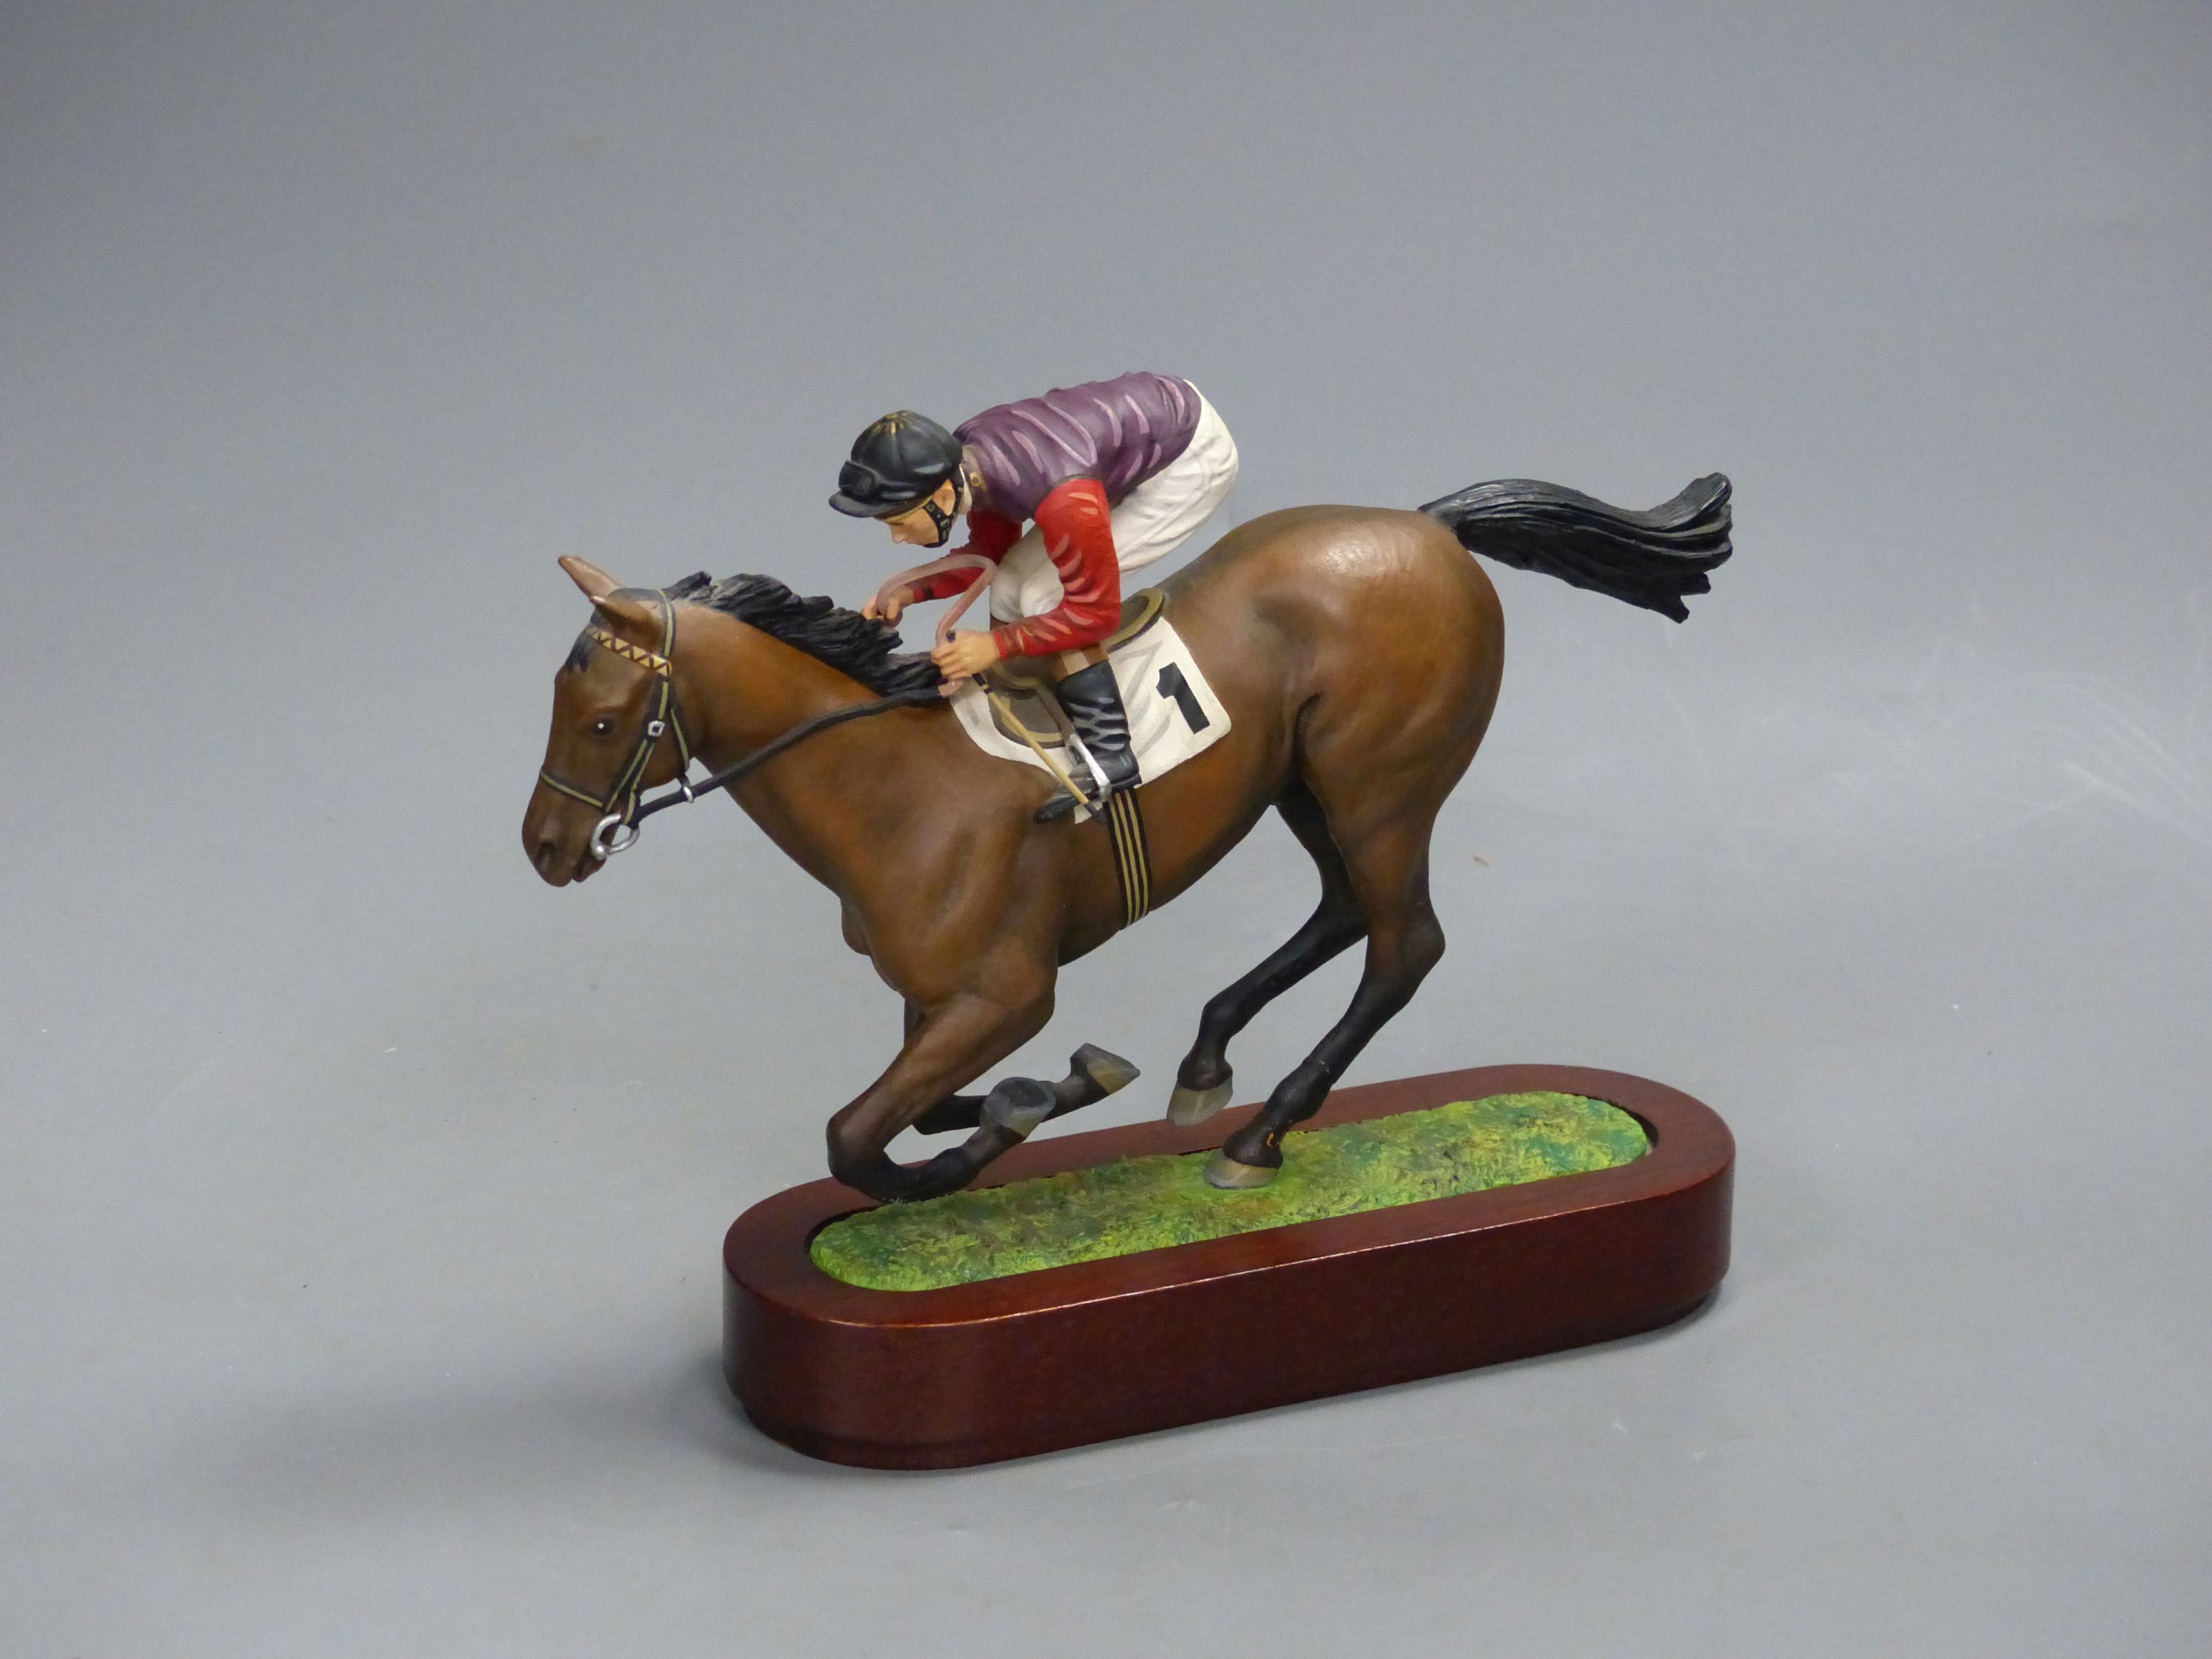 A Cameron Sculptures cold-painted bronze model of a racehorse with jockey up, height 16.5cm